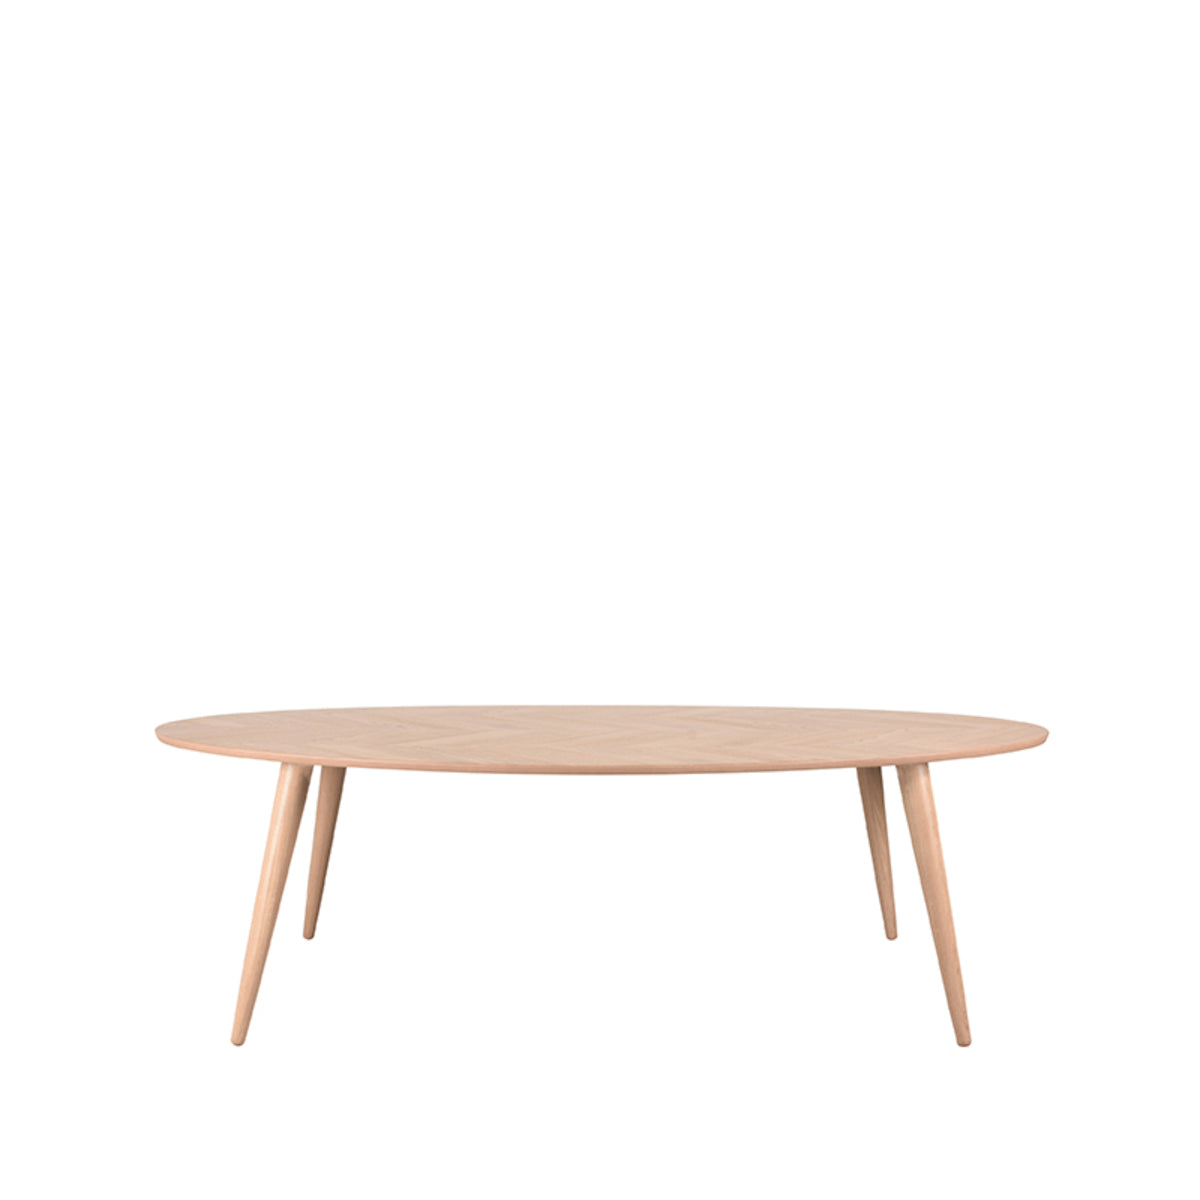 LABEL51 Dining room table Ines - Natural - Oak - 240 cm